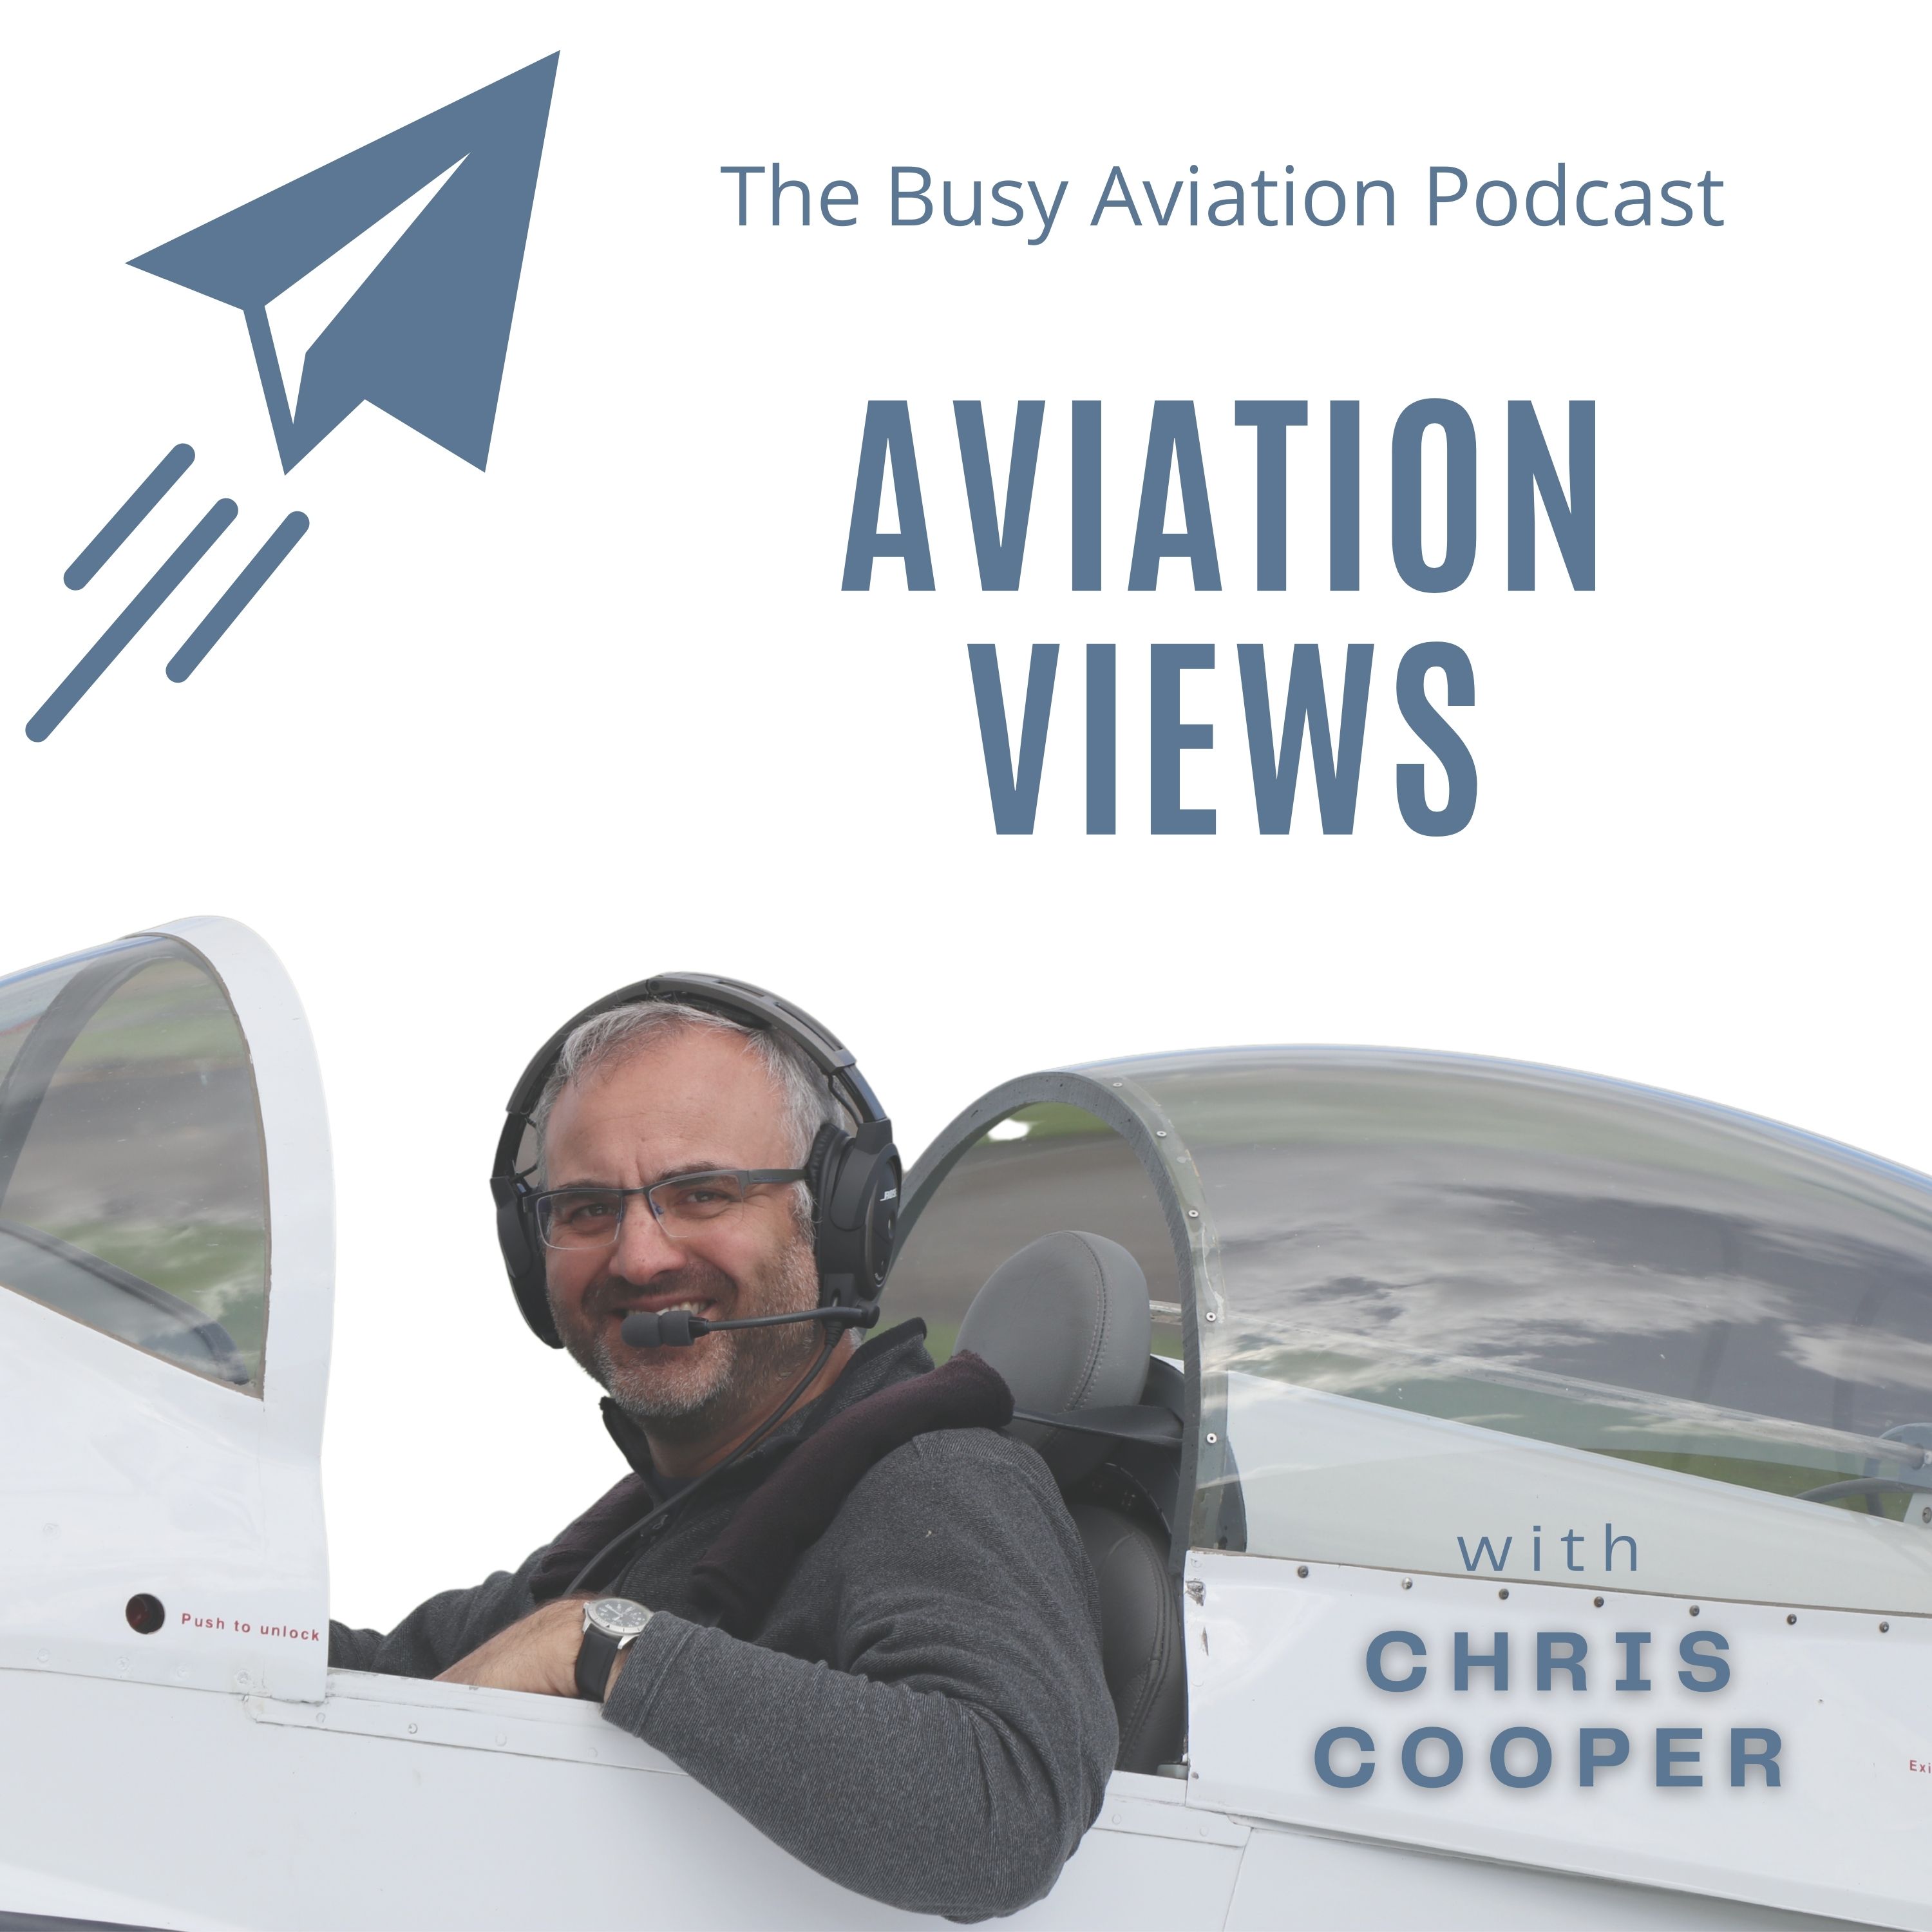 The Busy Aviation Podcast